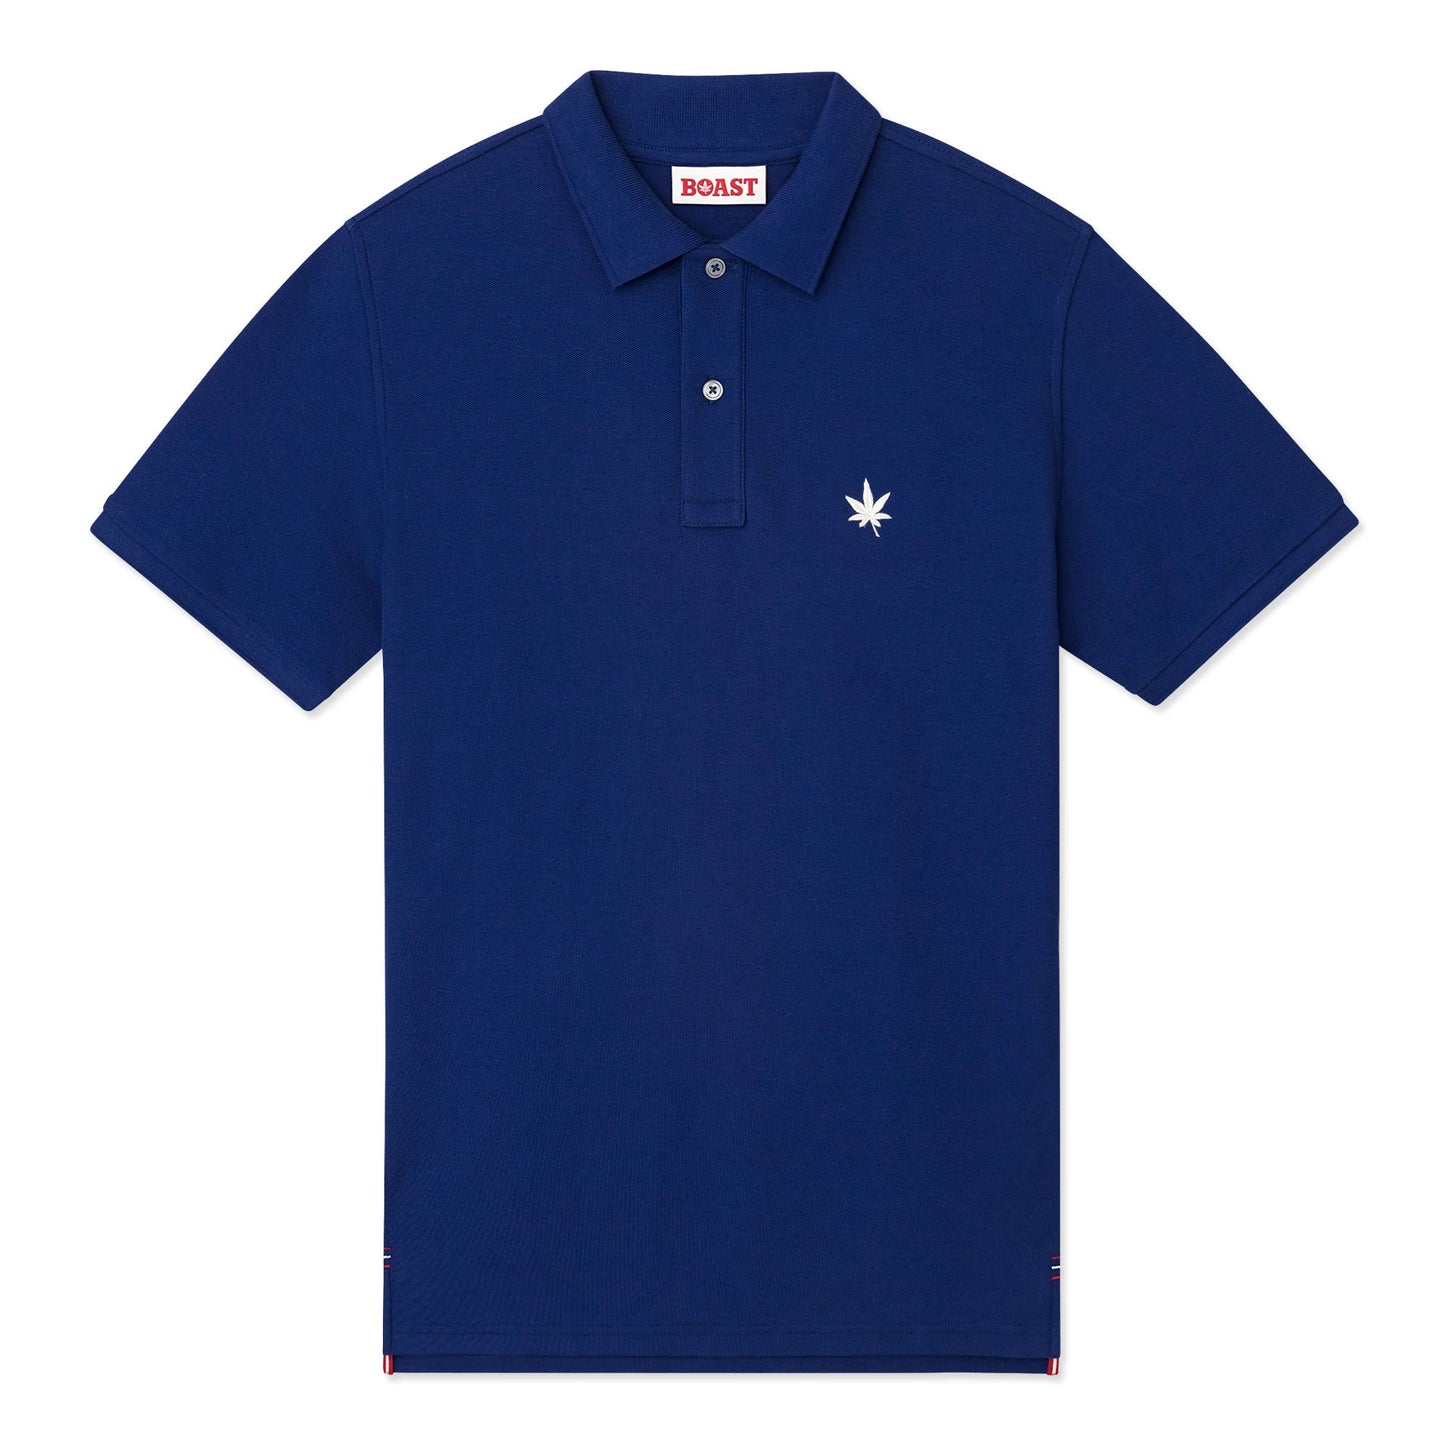 Blue polo with white embroidered leaf on the left chest.